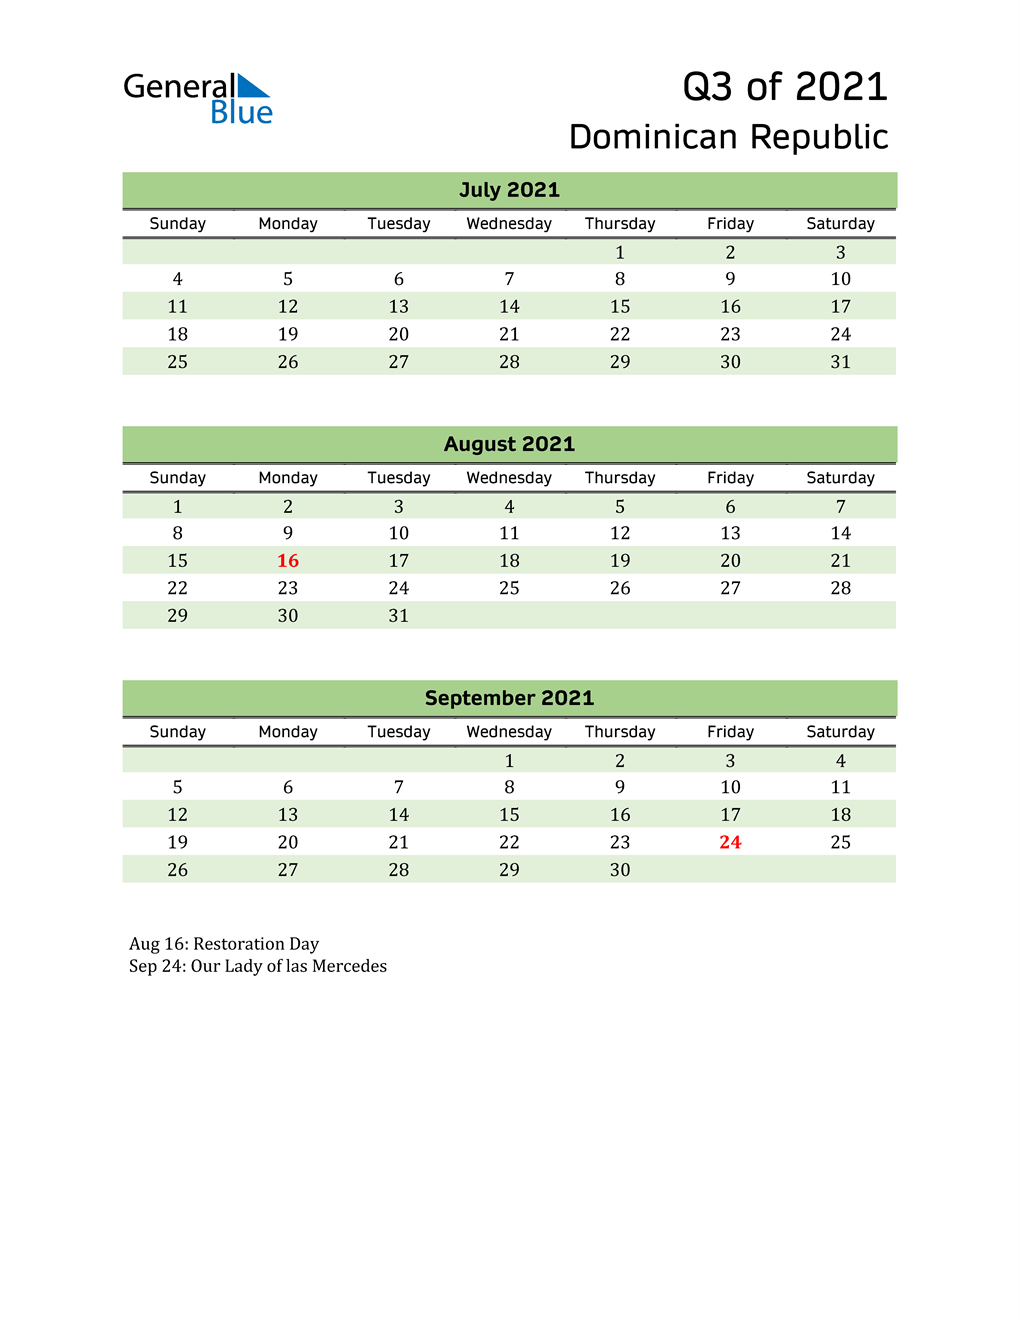  Quarterly Calendar 2021 with Dominican Republic Holidays 